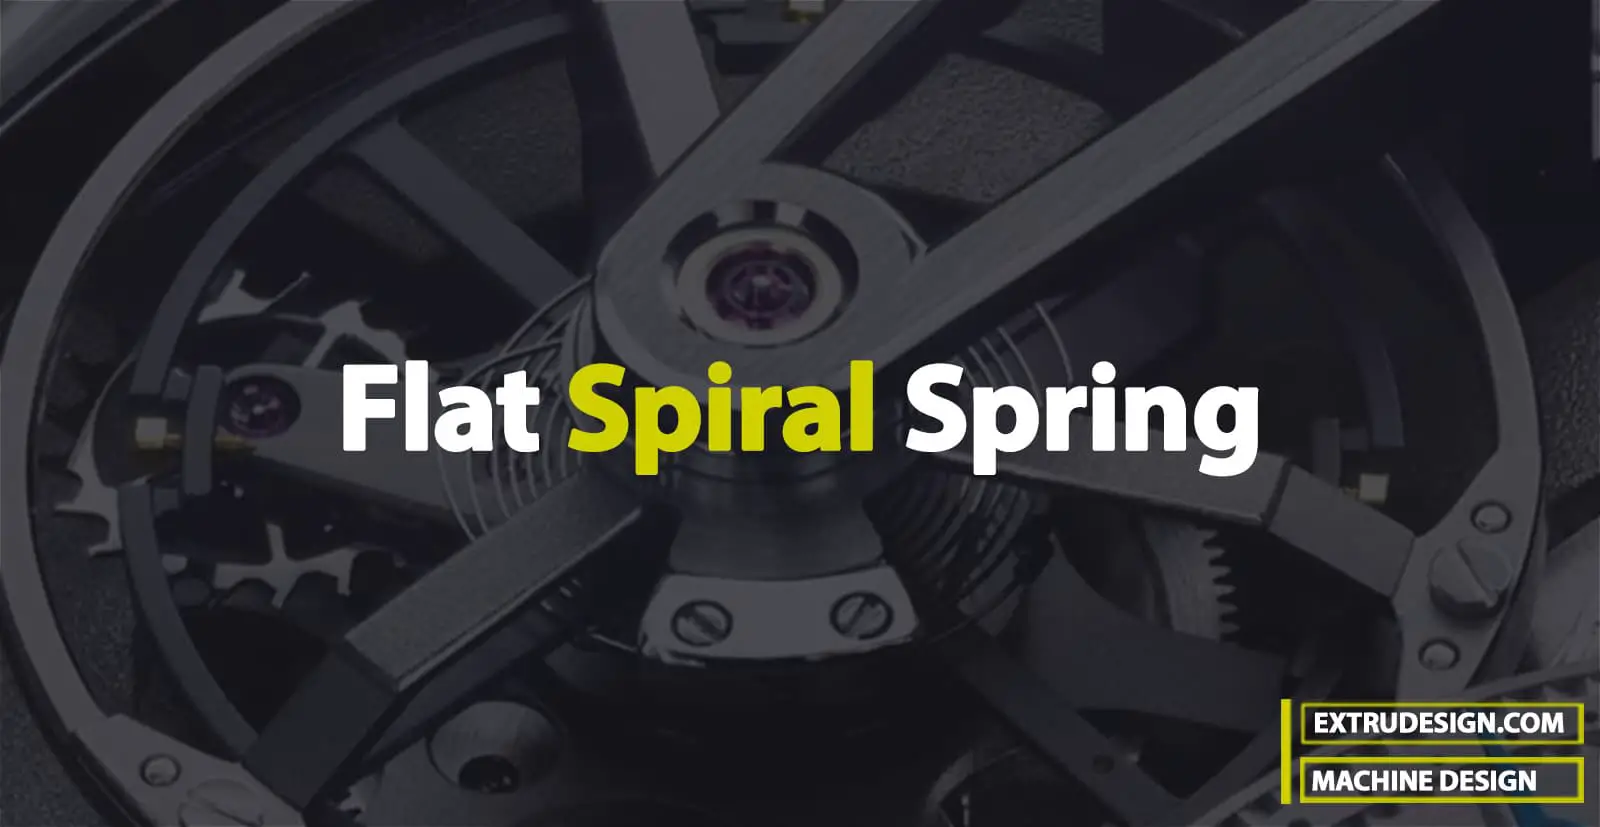 What are Flat Spiral Spring?